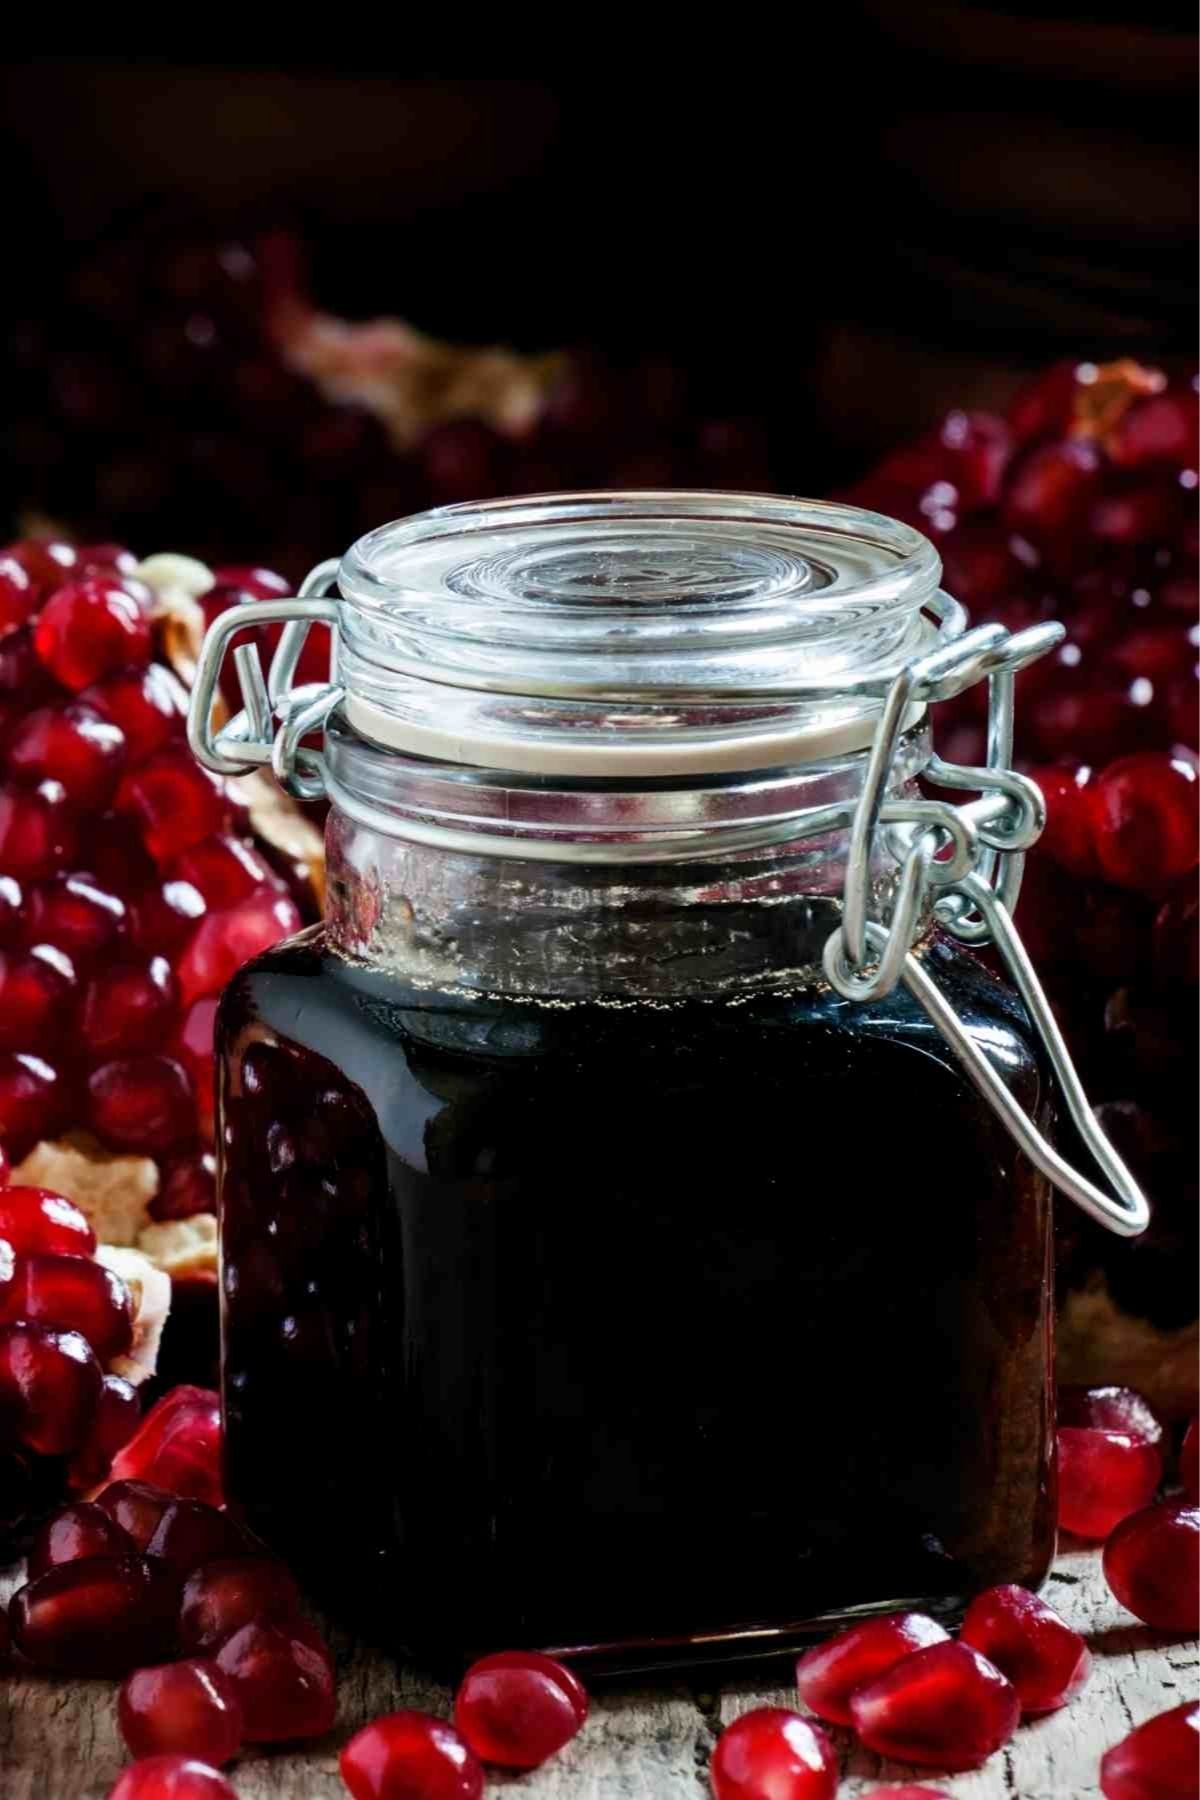 Homemade Pomegranate Molasses has a bright, fruity flavor and can be used in so many ways. It’s traditionally used in Middle Eastern cuisine, and really easy to make at home from scratch! You can drizzle this delicious syrup on desserts, use it as a glaze for cooking meat or as salad dressing.